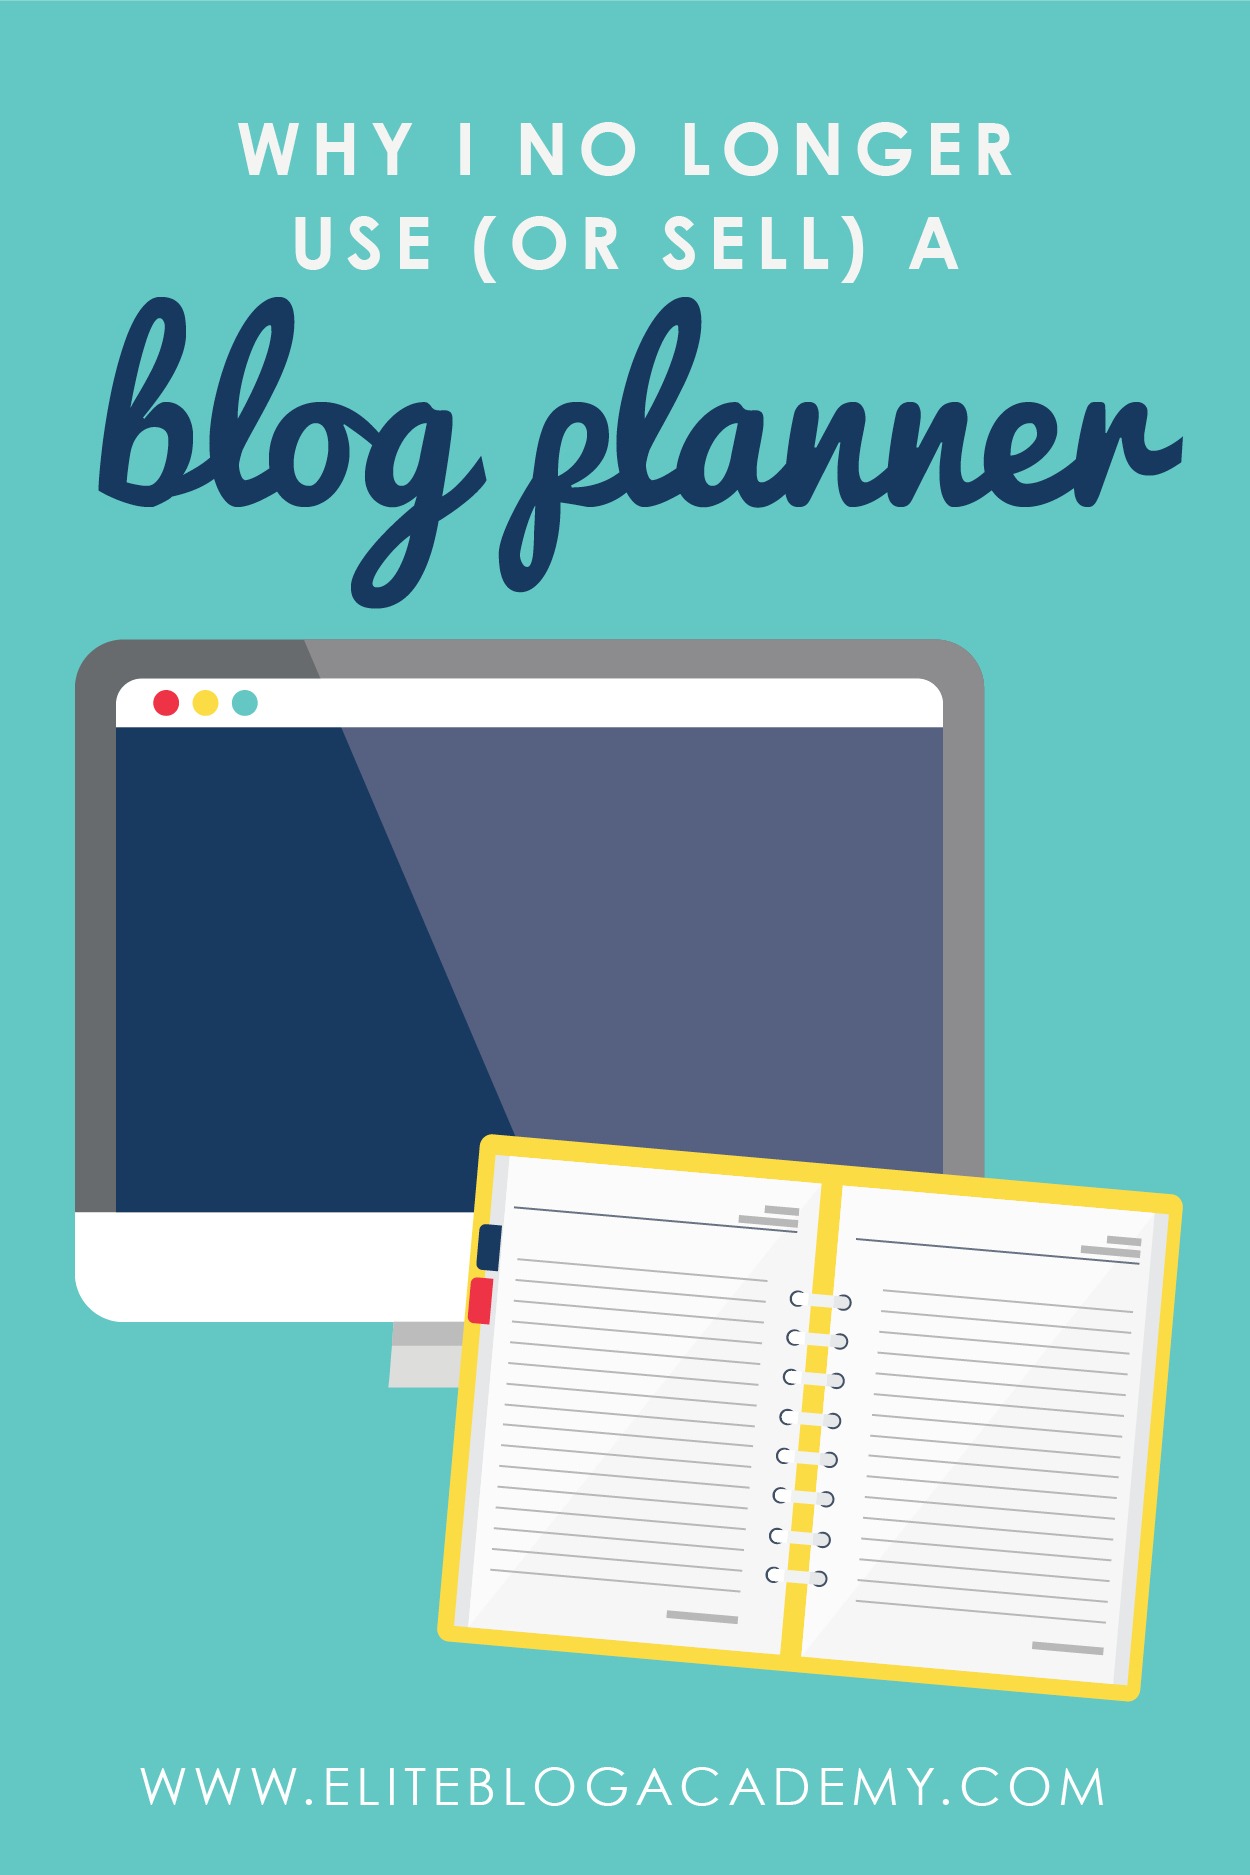 Want to know why I no longer sell a blog planner? Because I created something even better. Something that would help you organize your whole life, not just your blog.